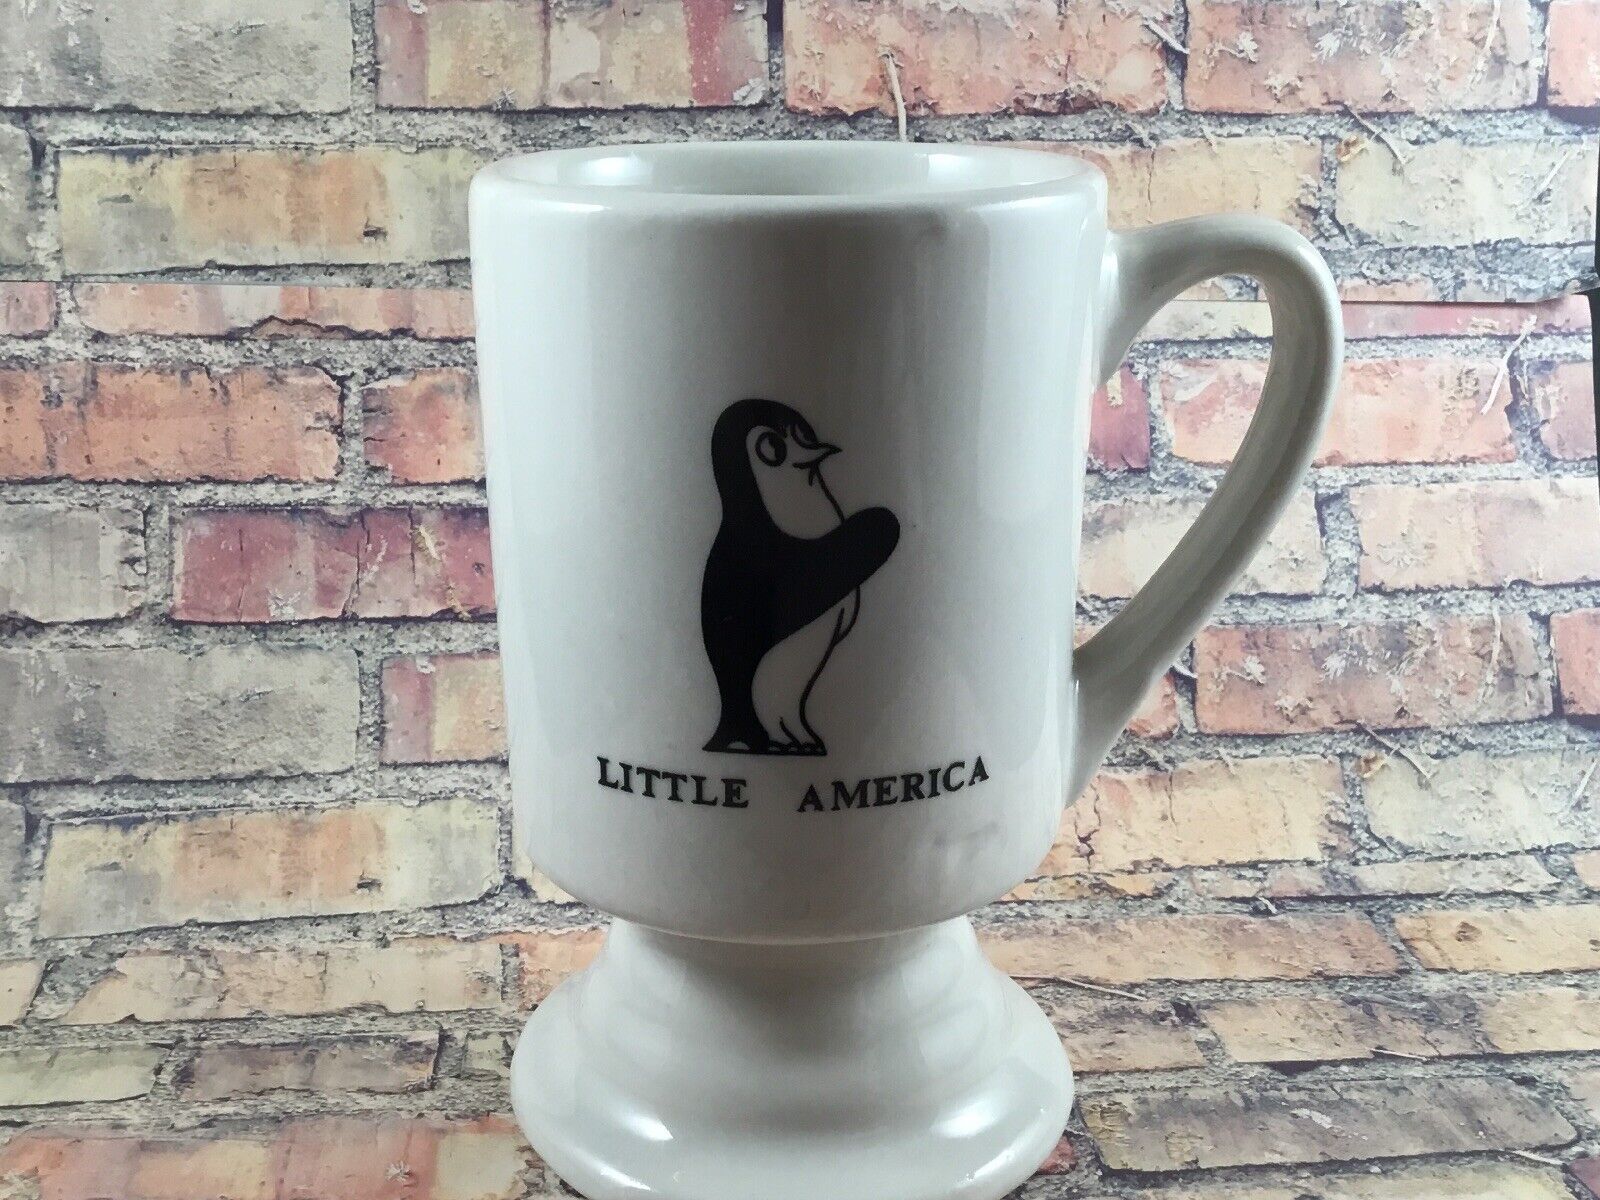  Penquin Little America WY Emperor the Penguin I-80 Footed Coffee Cup Mug 8 Oz